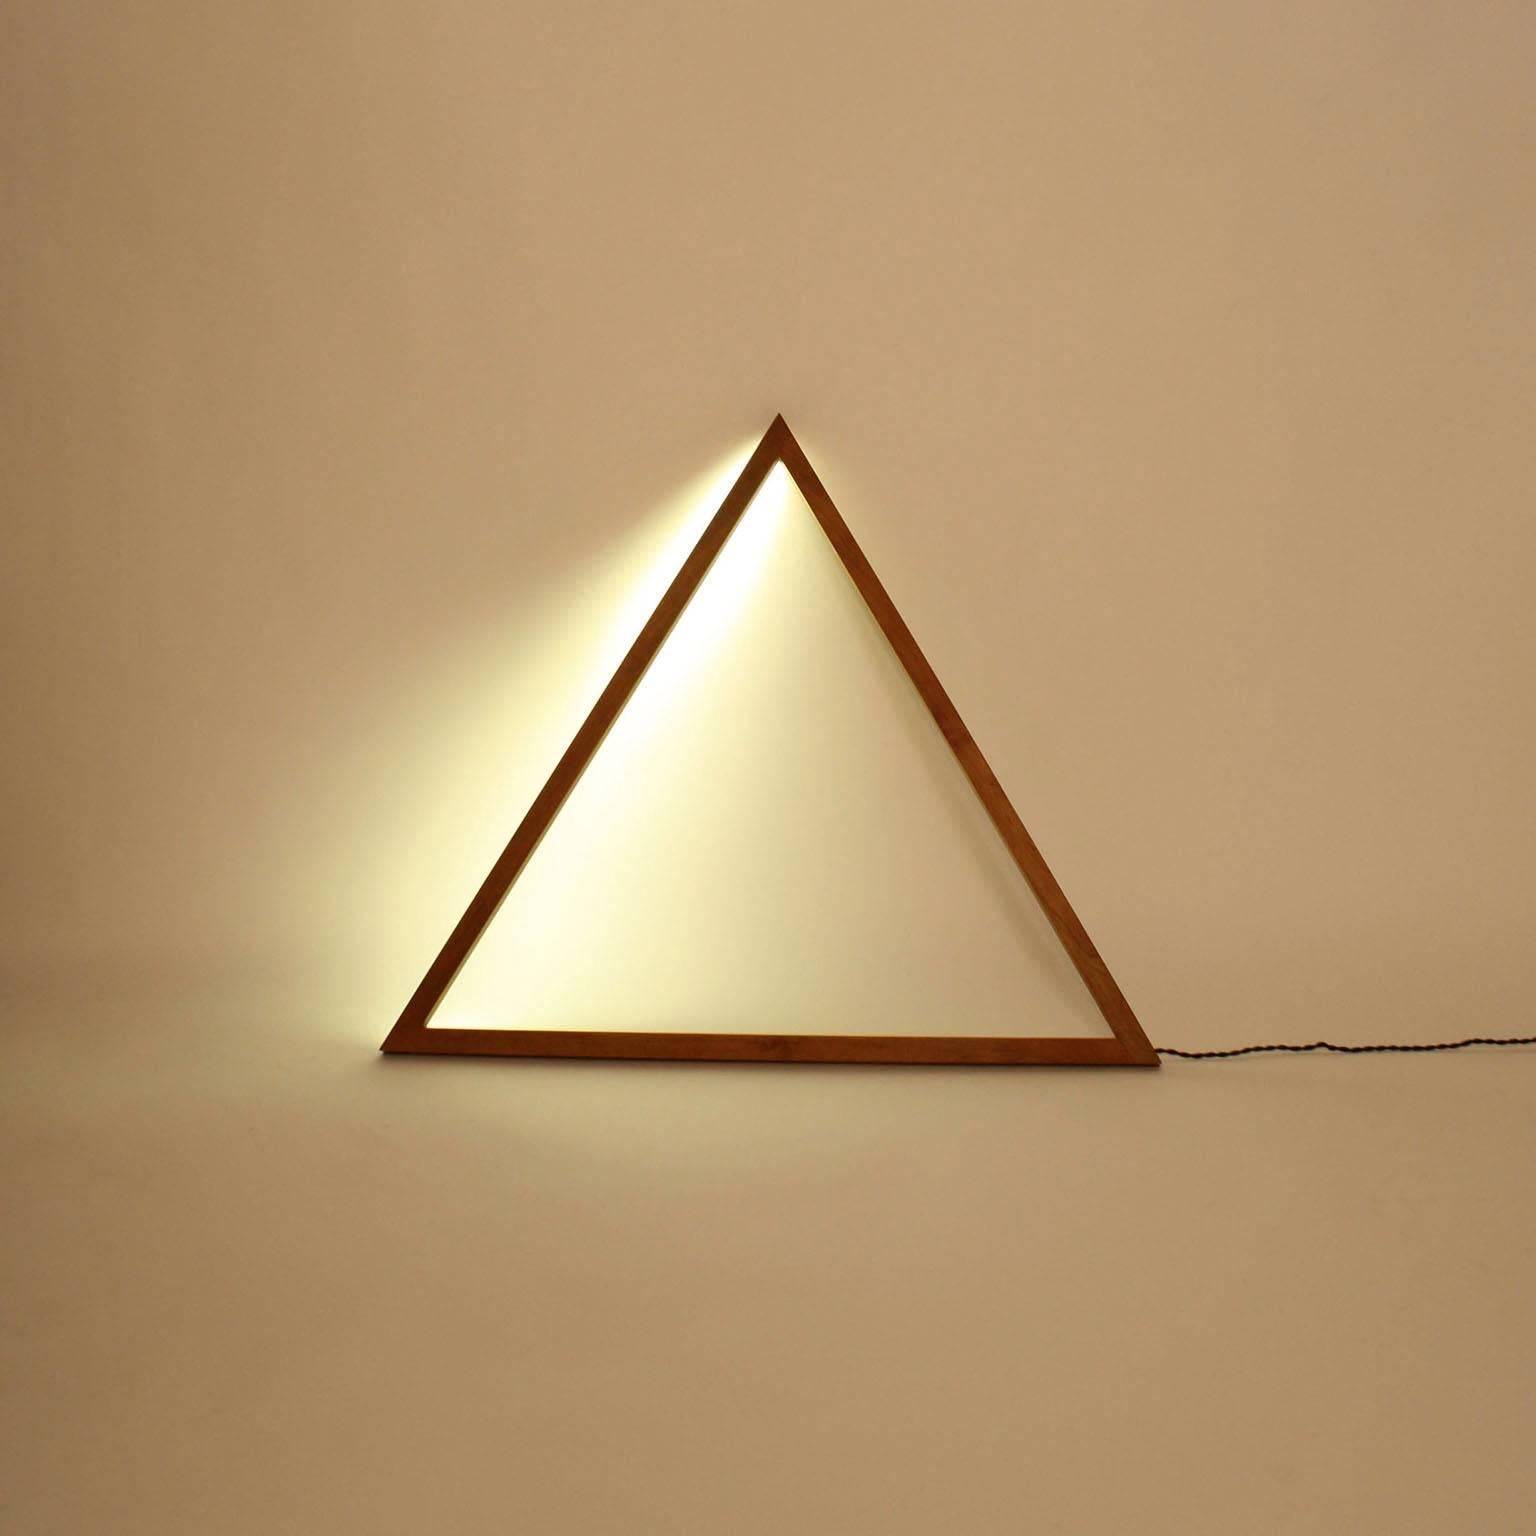 Other Triangle 2 Cherry LED Line Light Sculpture